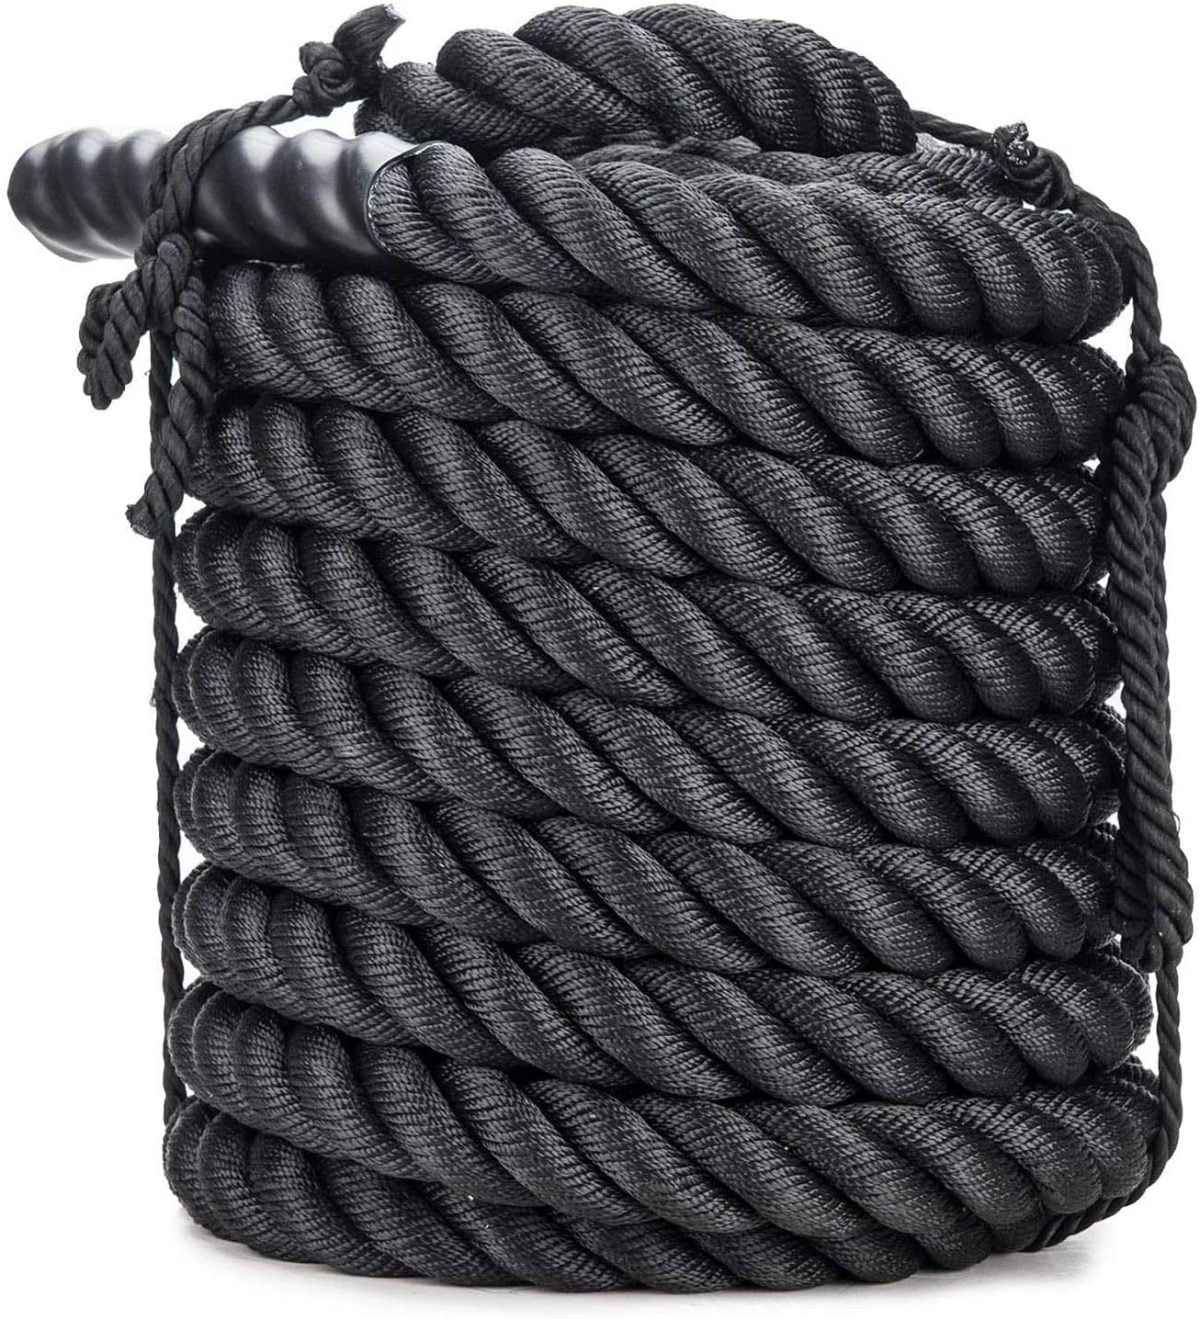 81Lr1I89Eml. Ac Sl1442 Proffessional Battle Rope 15Mtr. X Dia 50Mm Heavy Duty Fitness Ropes Strength Core Training For Strength And Conditioning Workouts Rope Black Gym Professional Battle Rope Gym Professional Battle Rope